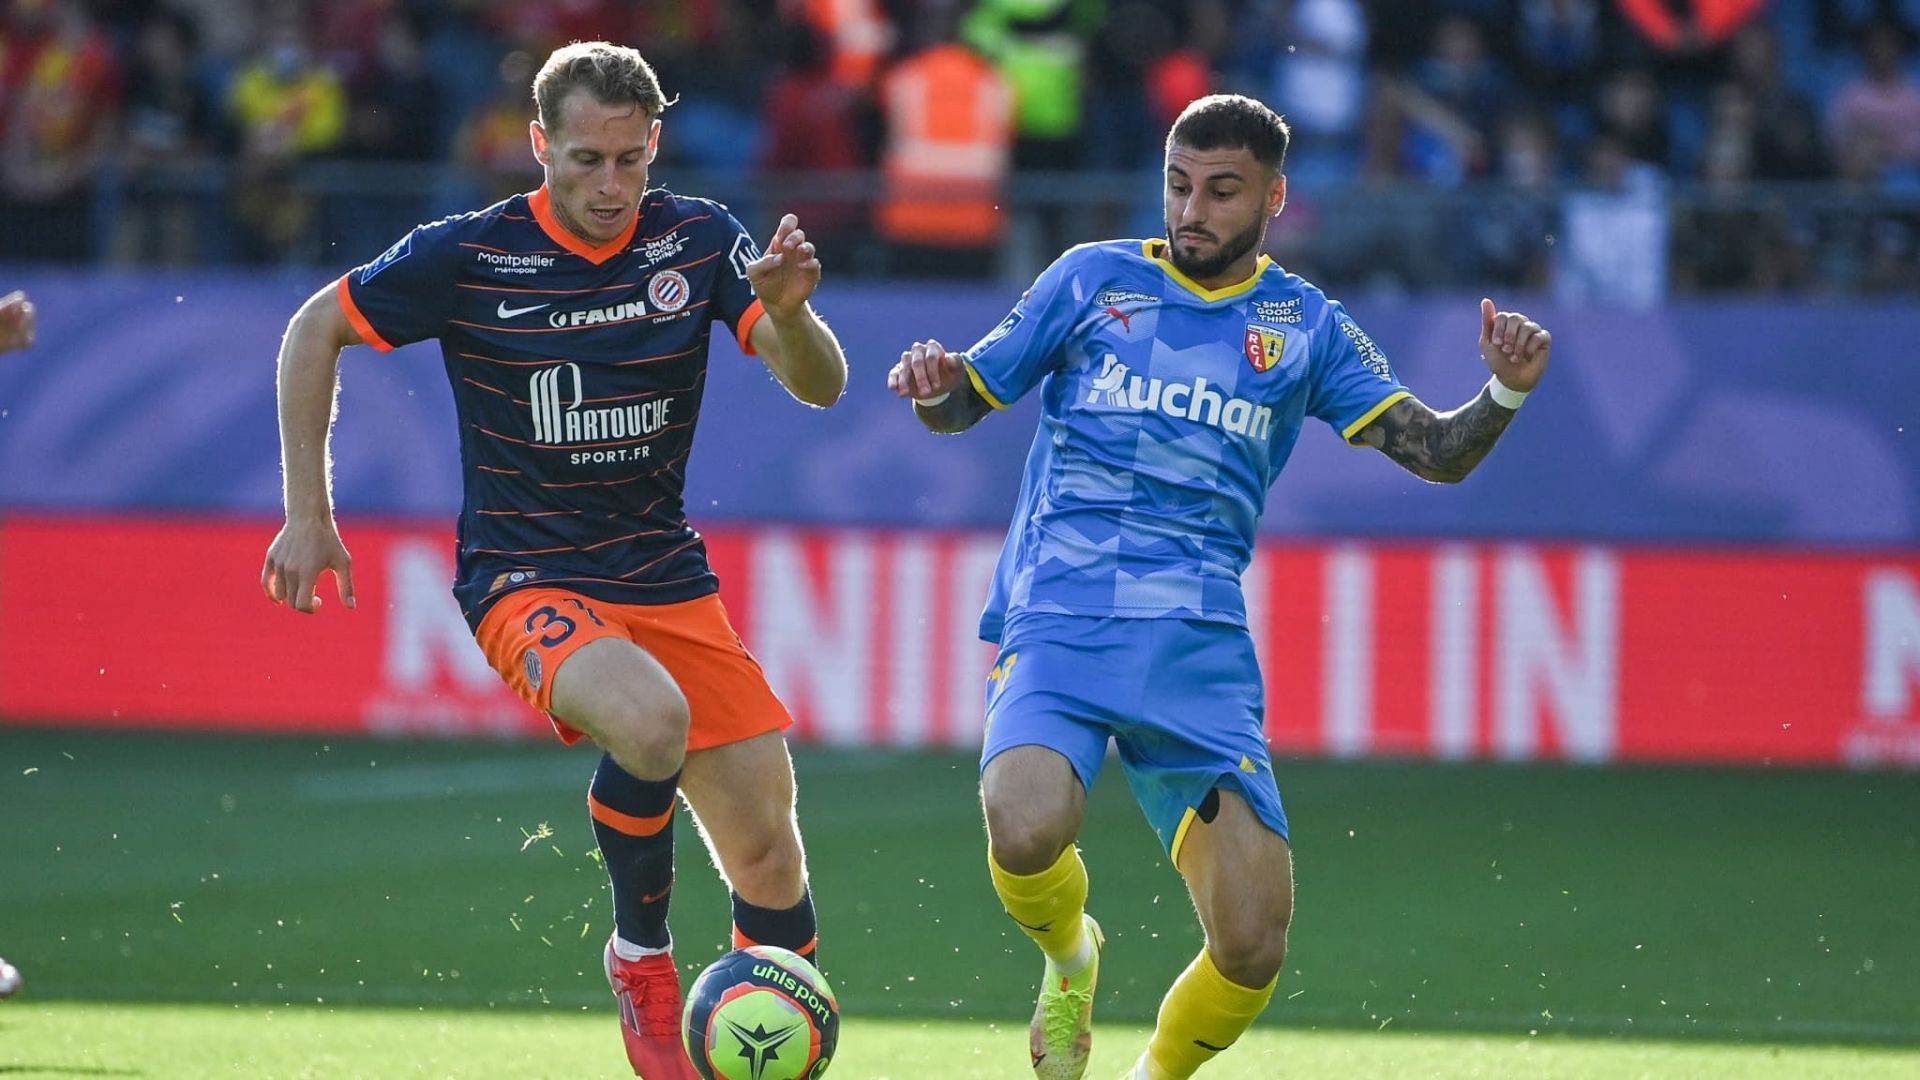 Lens and Montpellier will be looking to return to winning ways in their Ligue 1 clash on Saturday